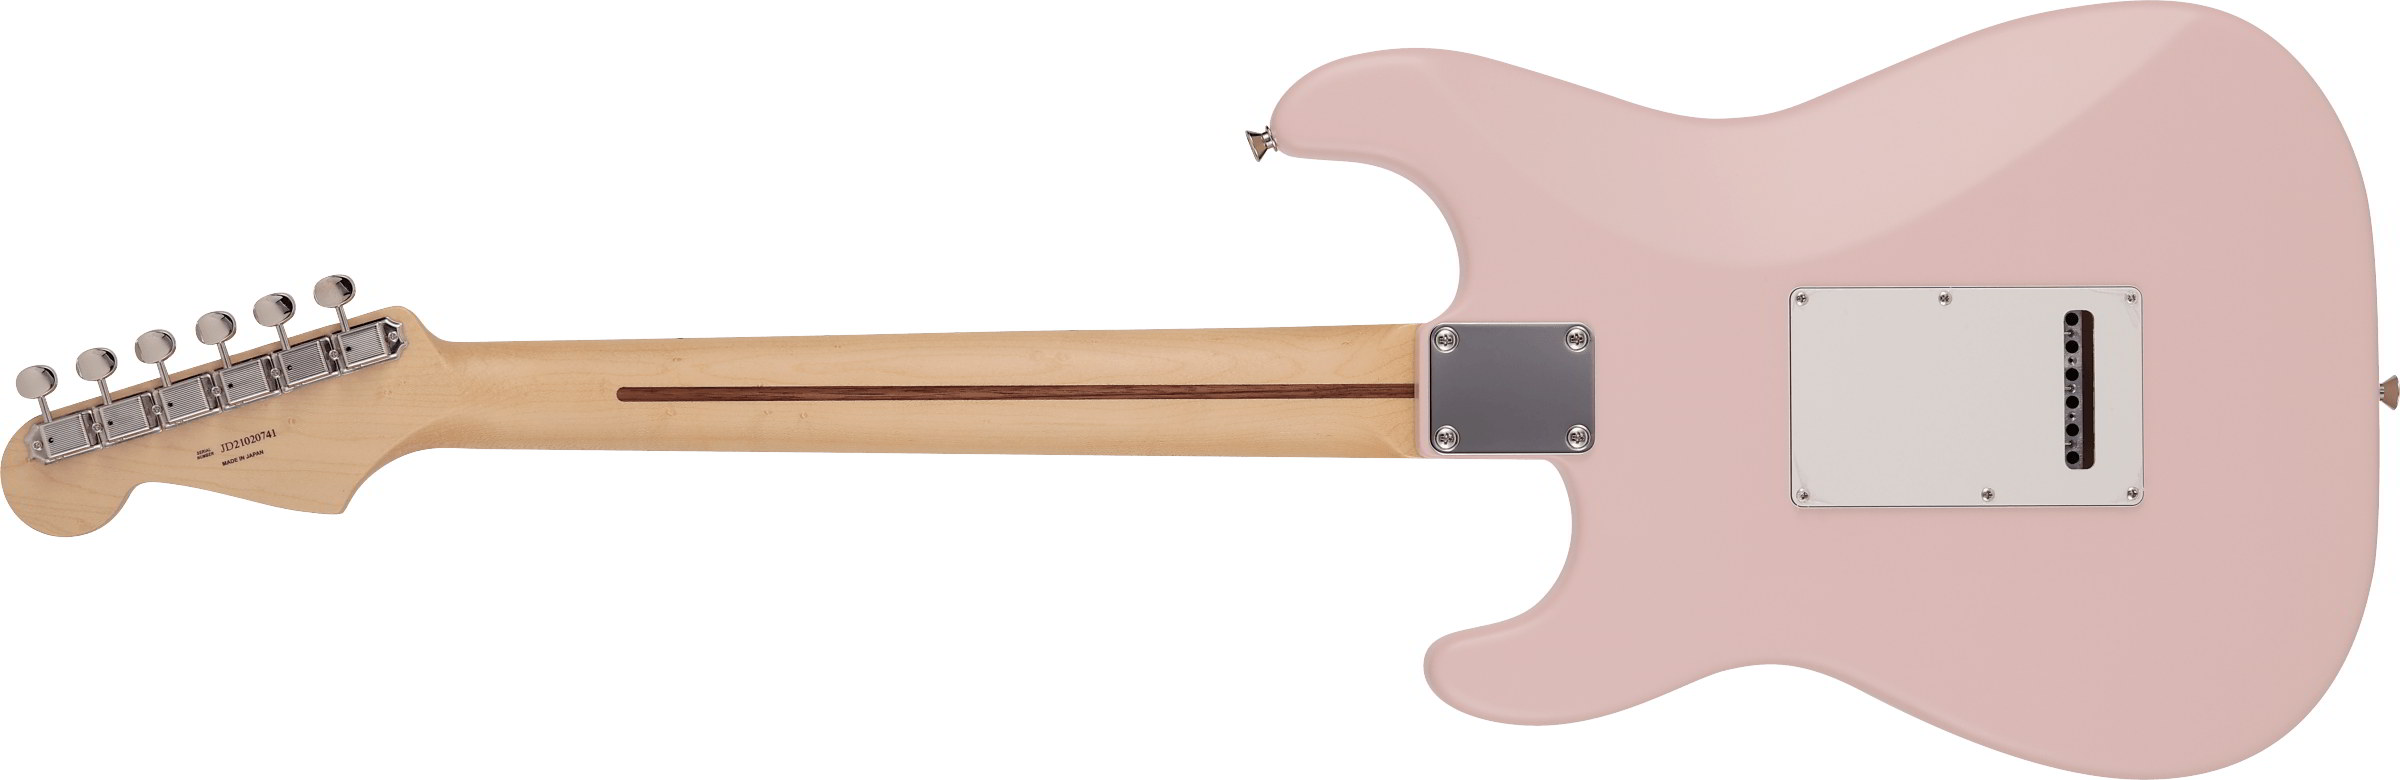 Made in Japan Junior Collection Stratocaster®, Maple Fingerboard, Satin Shell Pink追加画像